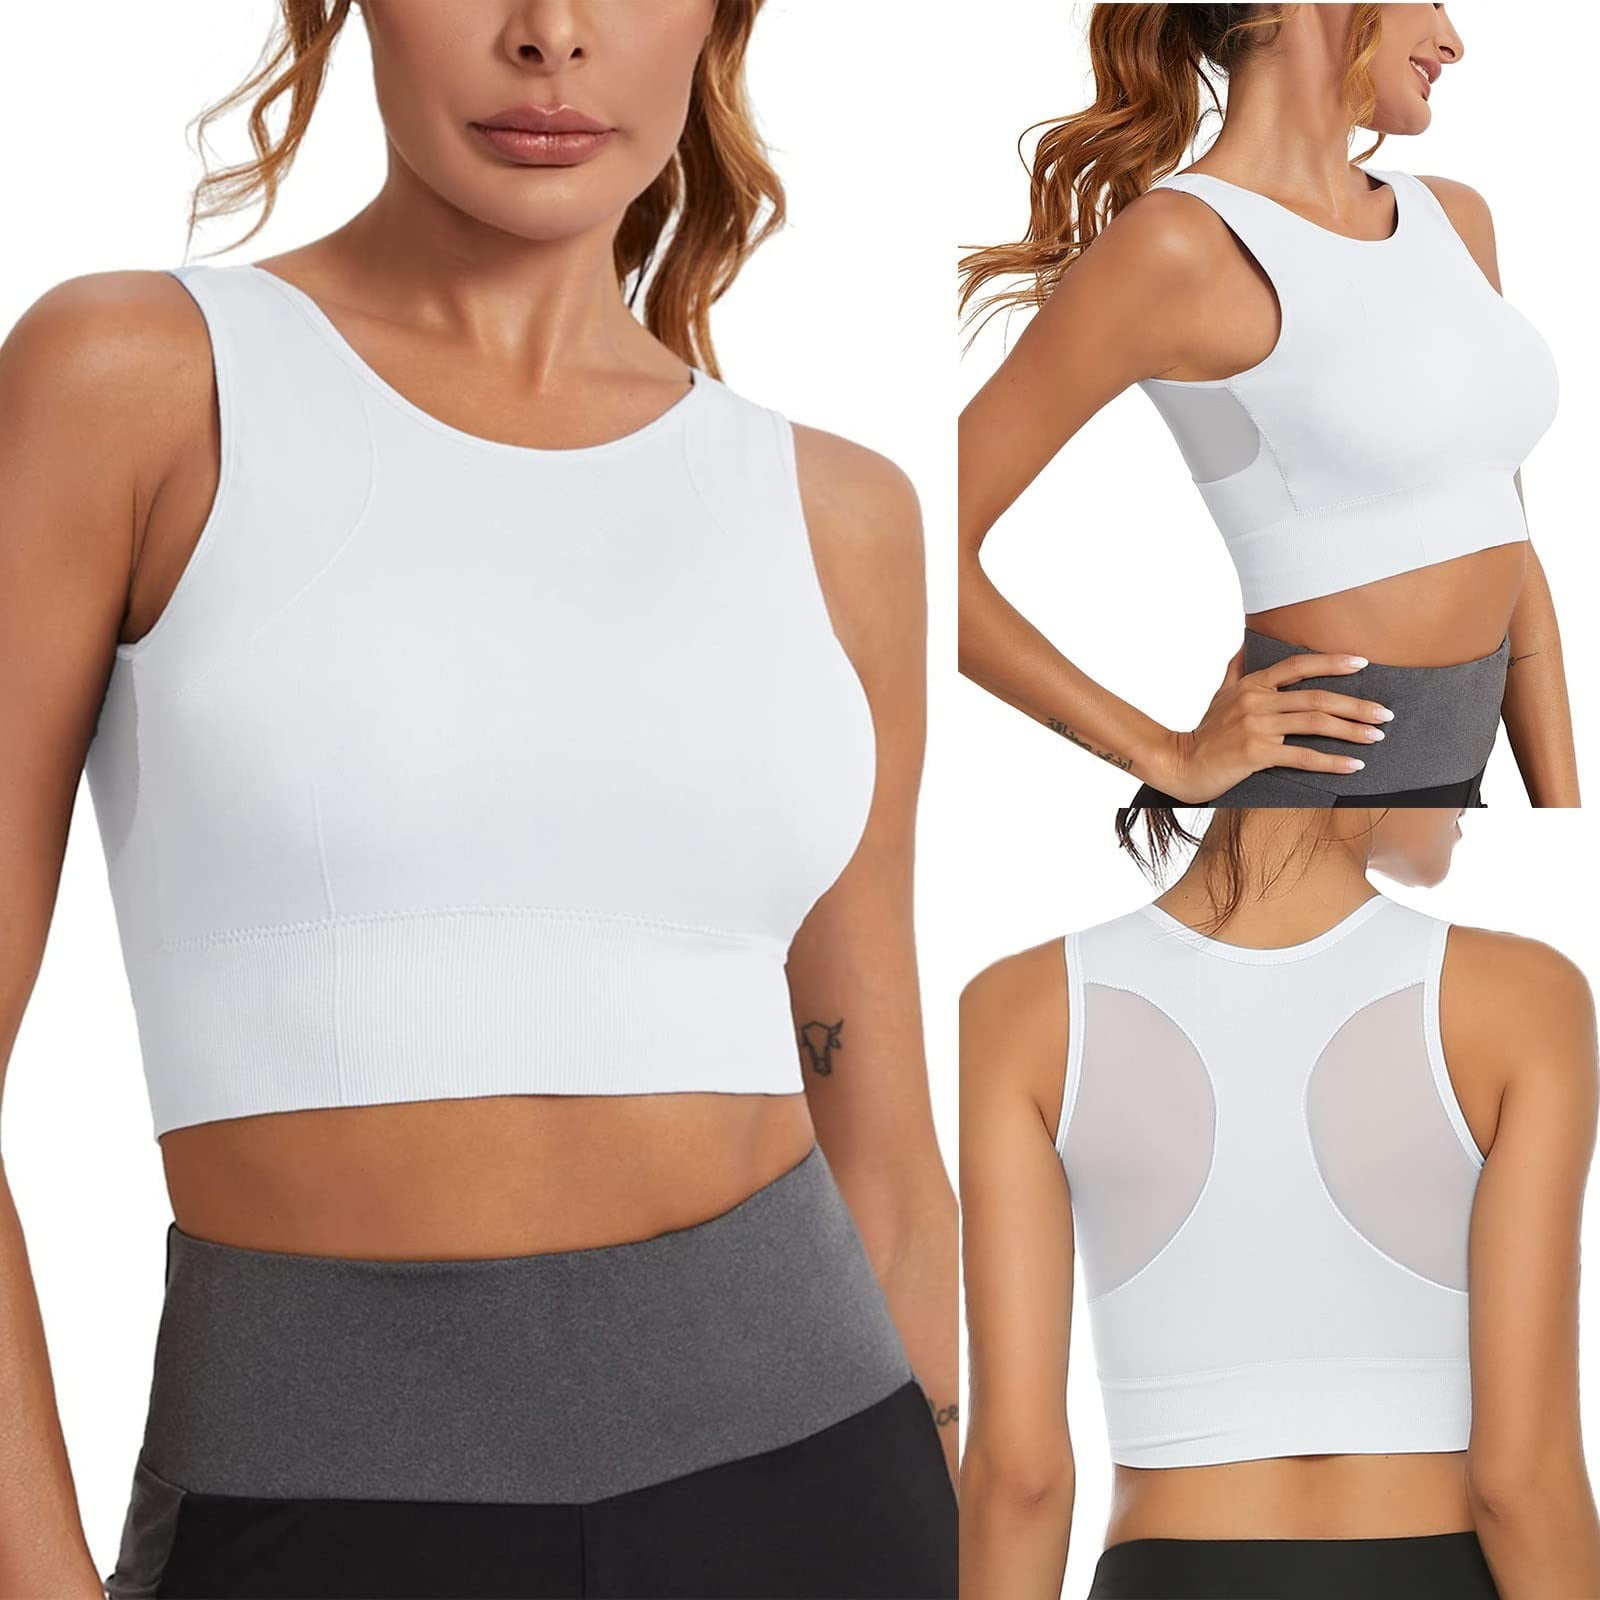 Kddylitq Supportive Sports Bras For Women Wireless Smoothing High Neck Bra  Inserts Push Up Wirefree Adjustable Racerback Bralette Push Up Running